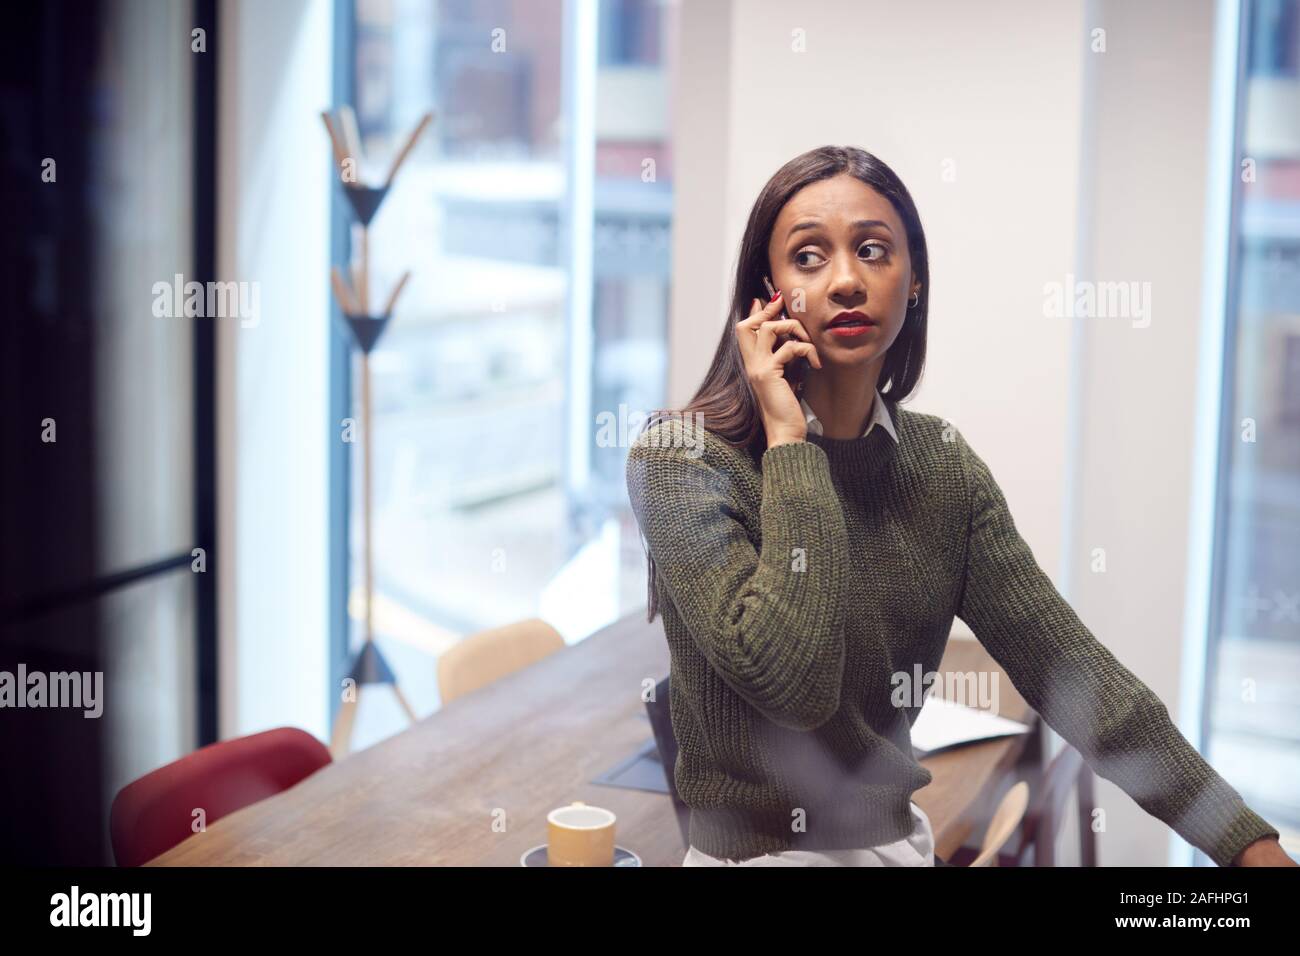 Businesswoman Sitting on Desk in Meeting Room Talking On Mobile Phone Banque D'Images